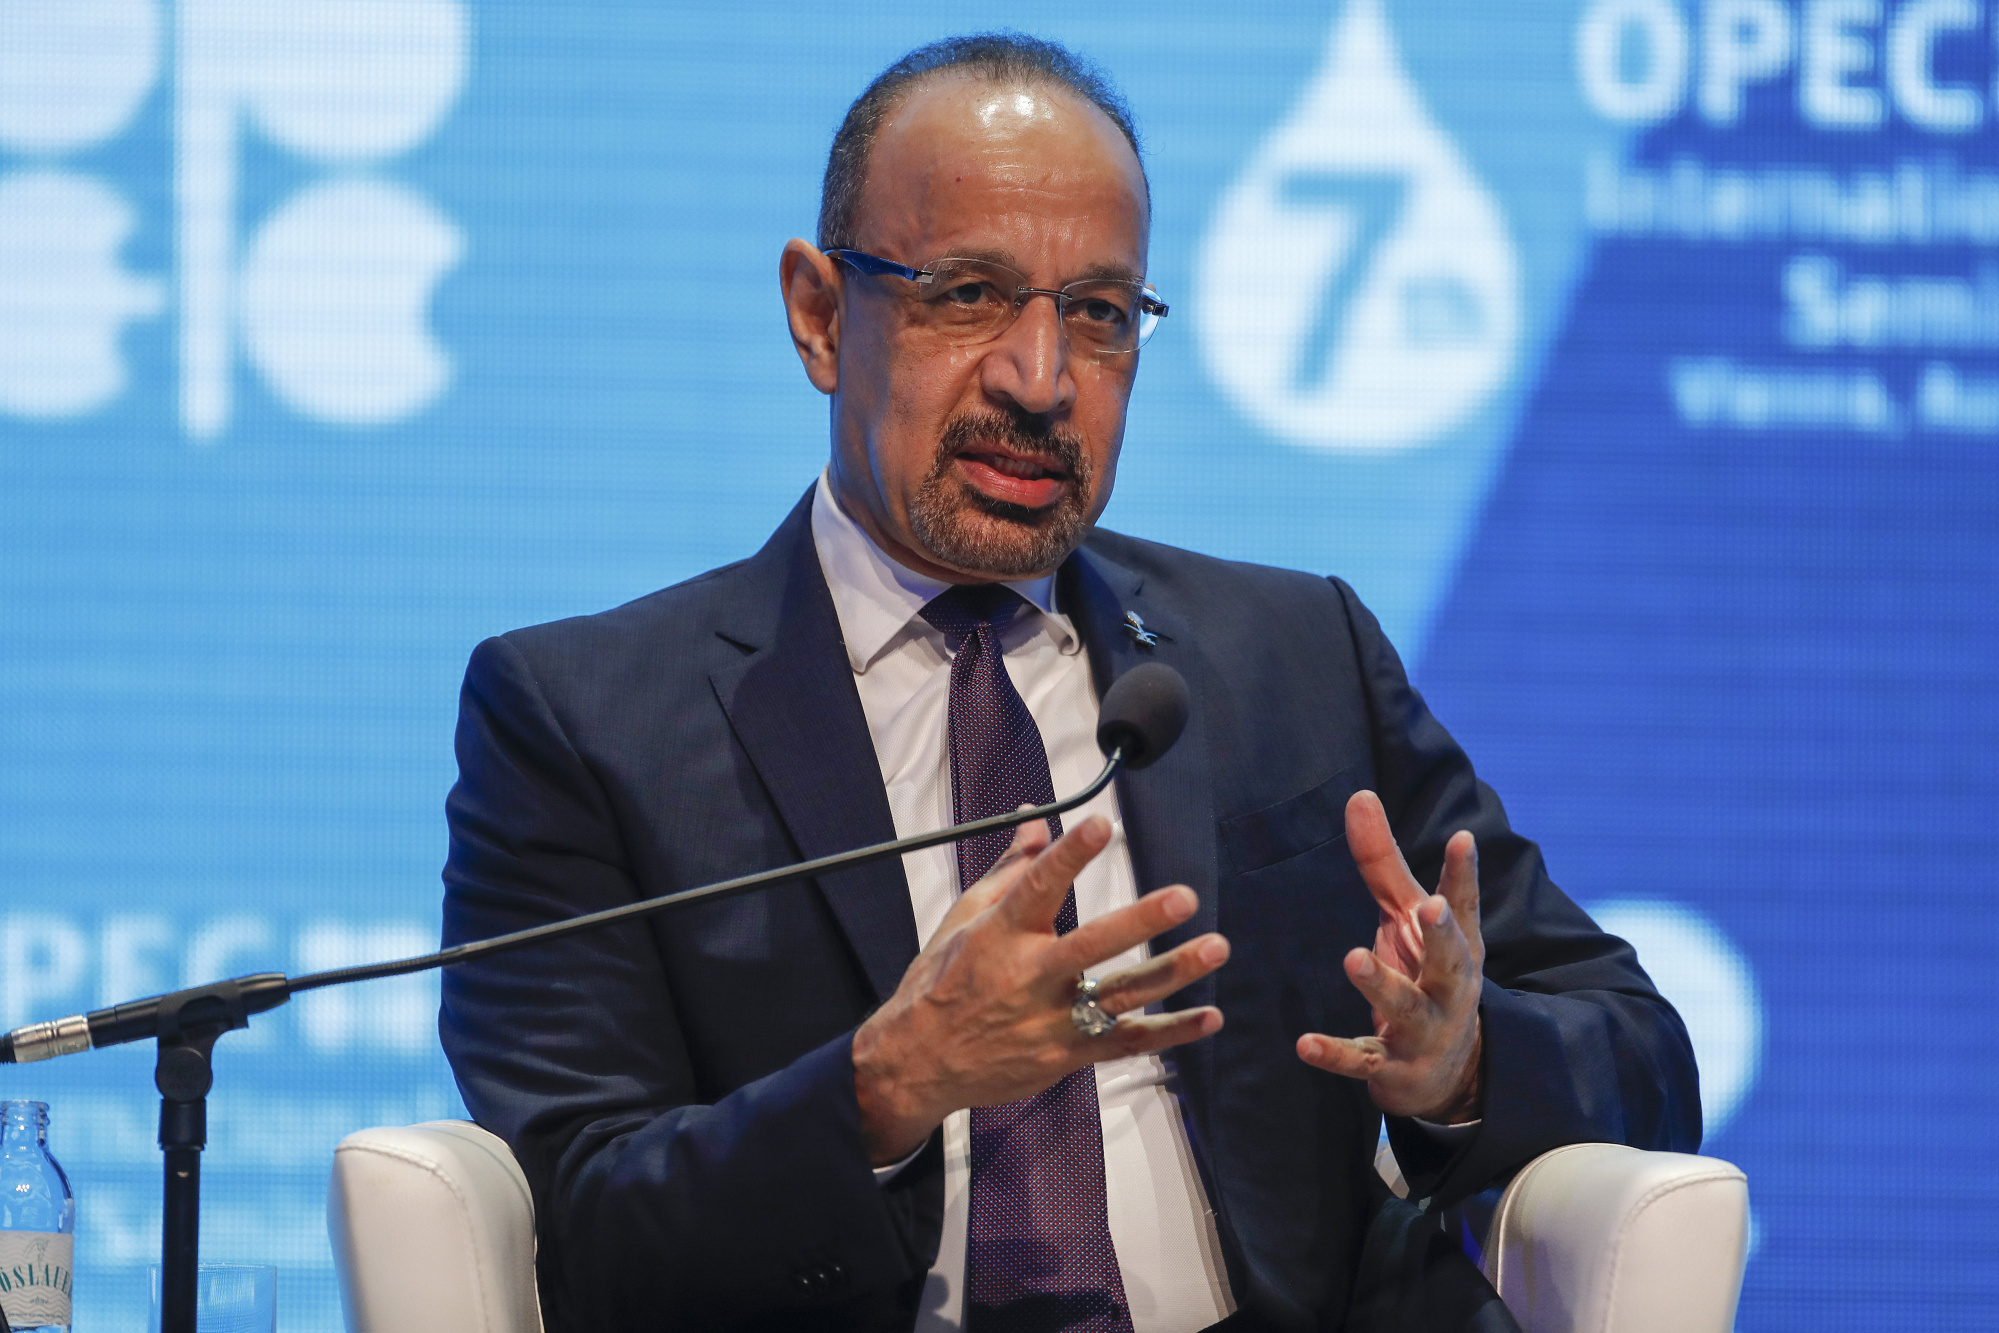 Khalid al-Falih, Saudi Arabia's energy minister, gestures as he speaks during day two of the 7th Organization Of Petroleum Exporting Countries (OPEC) international seminar in Vienna, Austria, on Thursday, June 21, 2018. Photographer: Stefan Wermuth/Bloomberg